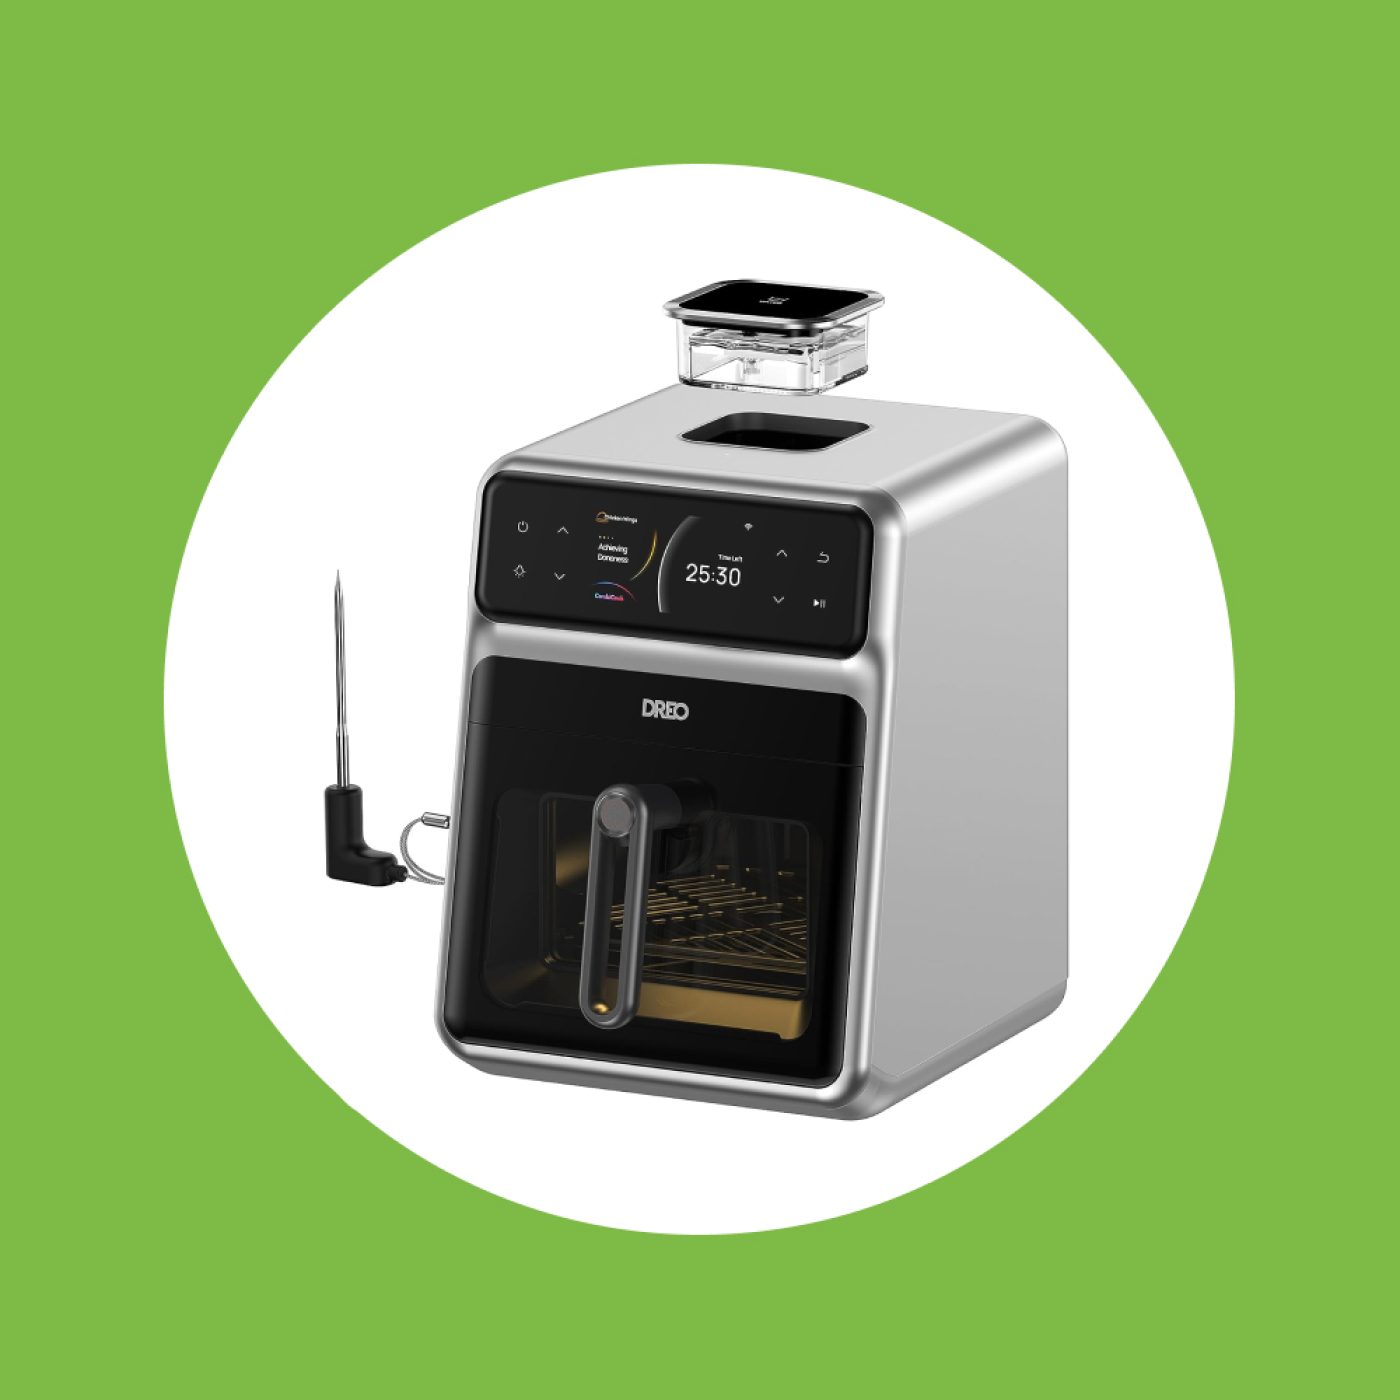 Dreo ChefMaker Combi Fryer For Perfectly Cooked Food - Shop With Me Mama